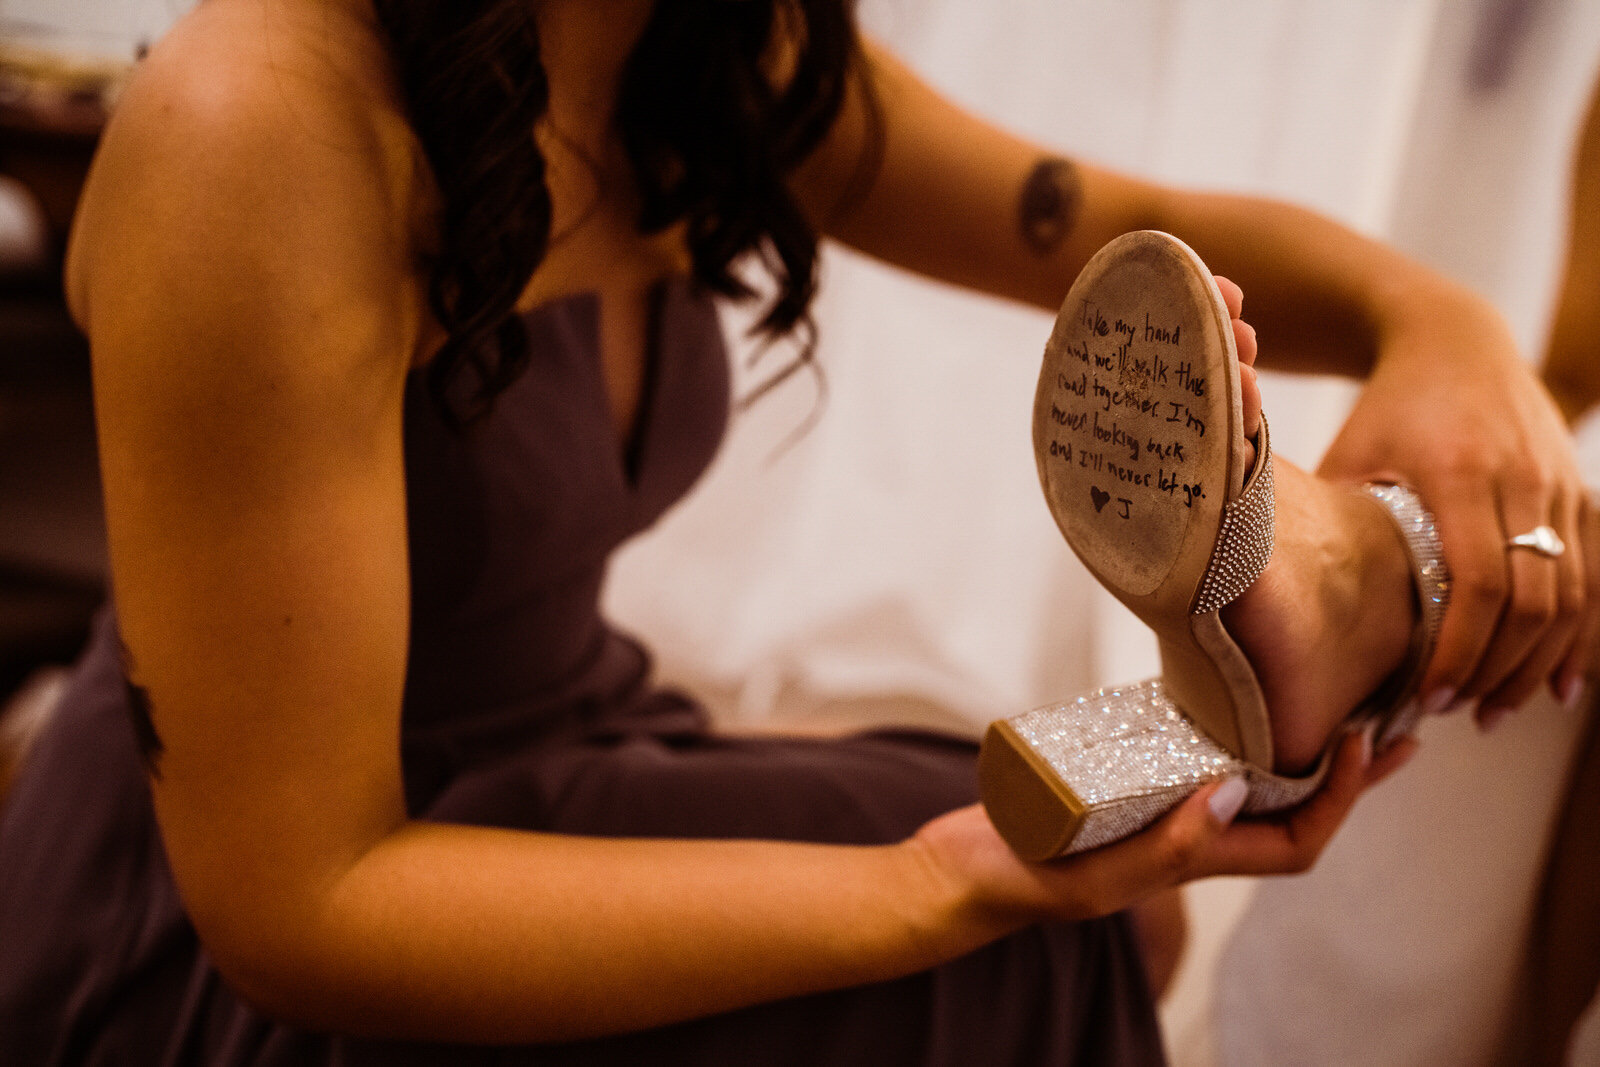 Bride's shoe detail with note from groom at Franciscan Gardens wedding in San Juan Capistrano, CA by Kept Record www.keptrecord.com